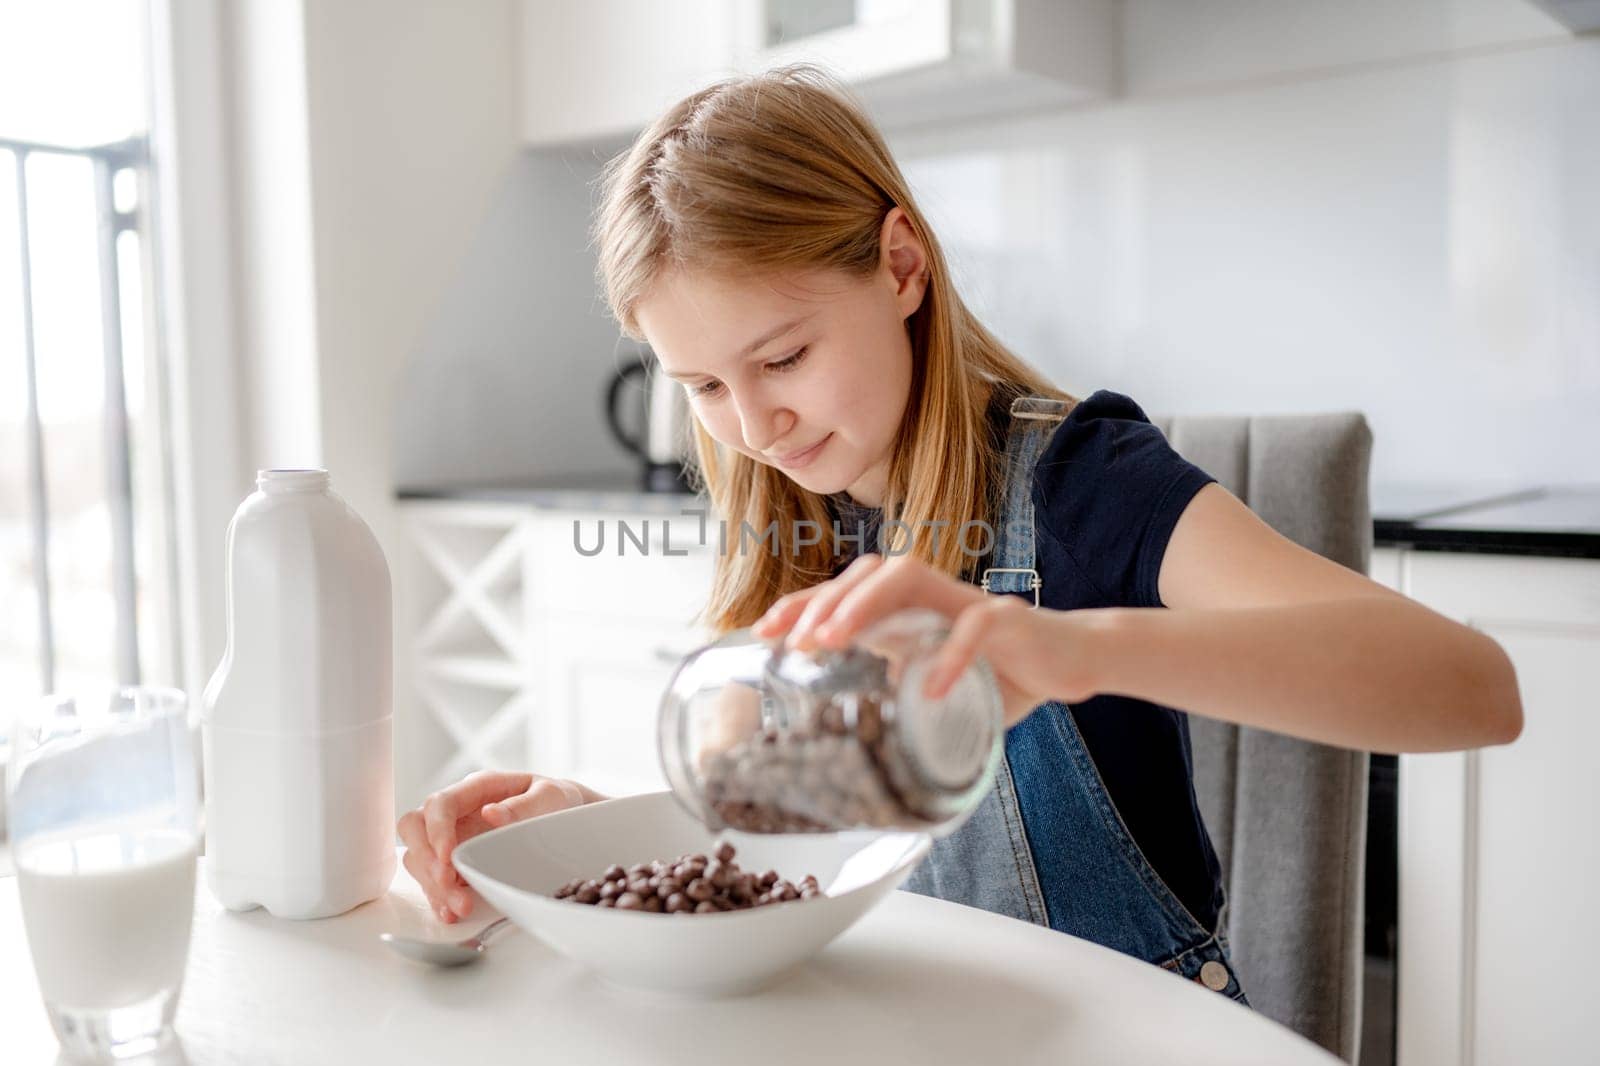 Cute Girl Pours Cereal Into Plate For Breakfast by tan4ikk1